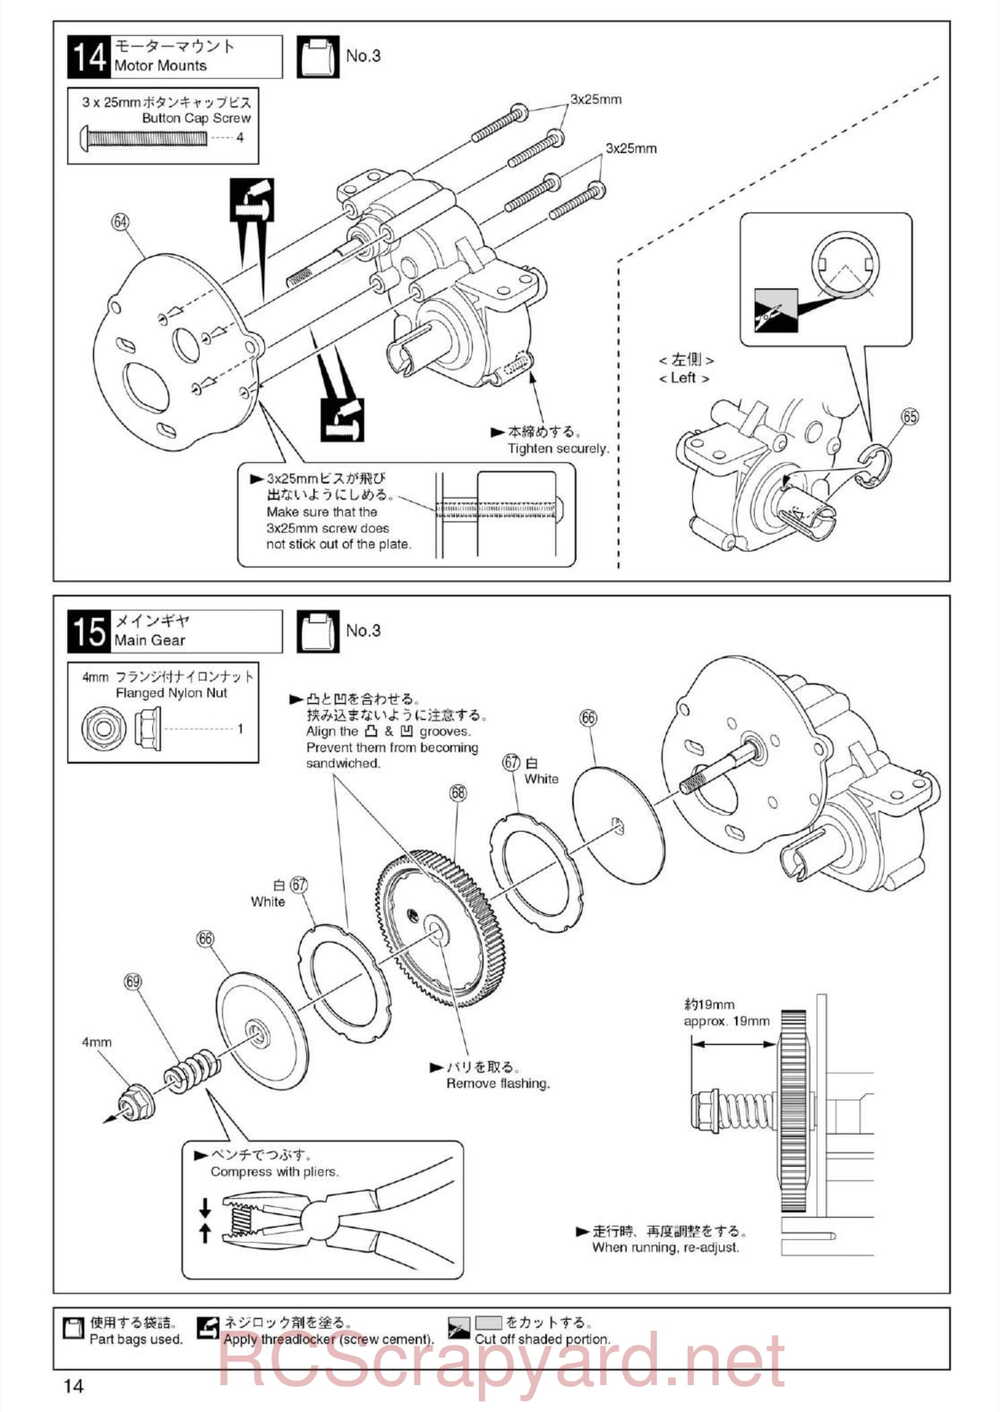 Kyosho - 30074 - Ultima-RB5 - Manual - Page 14